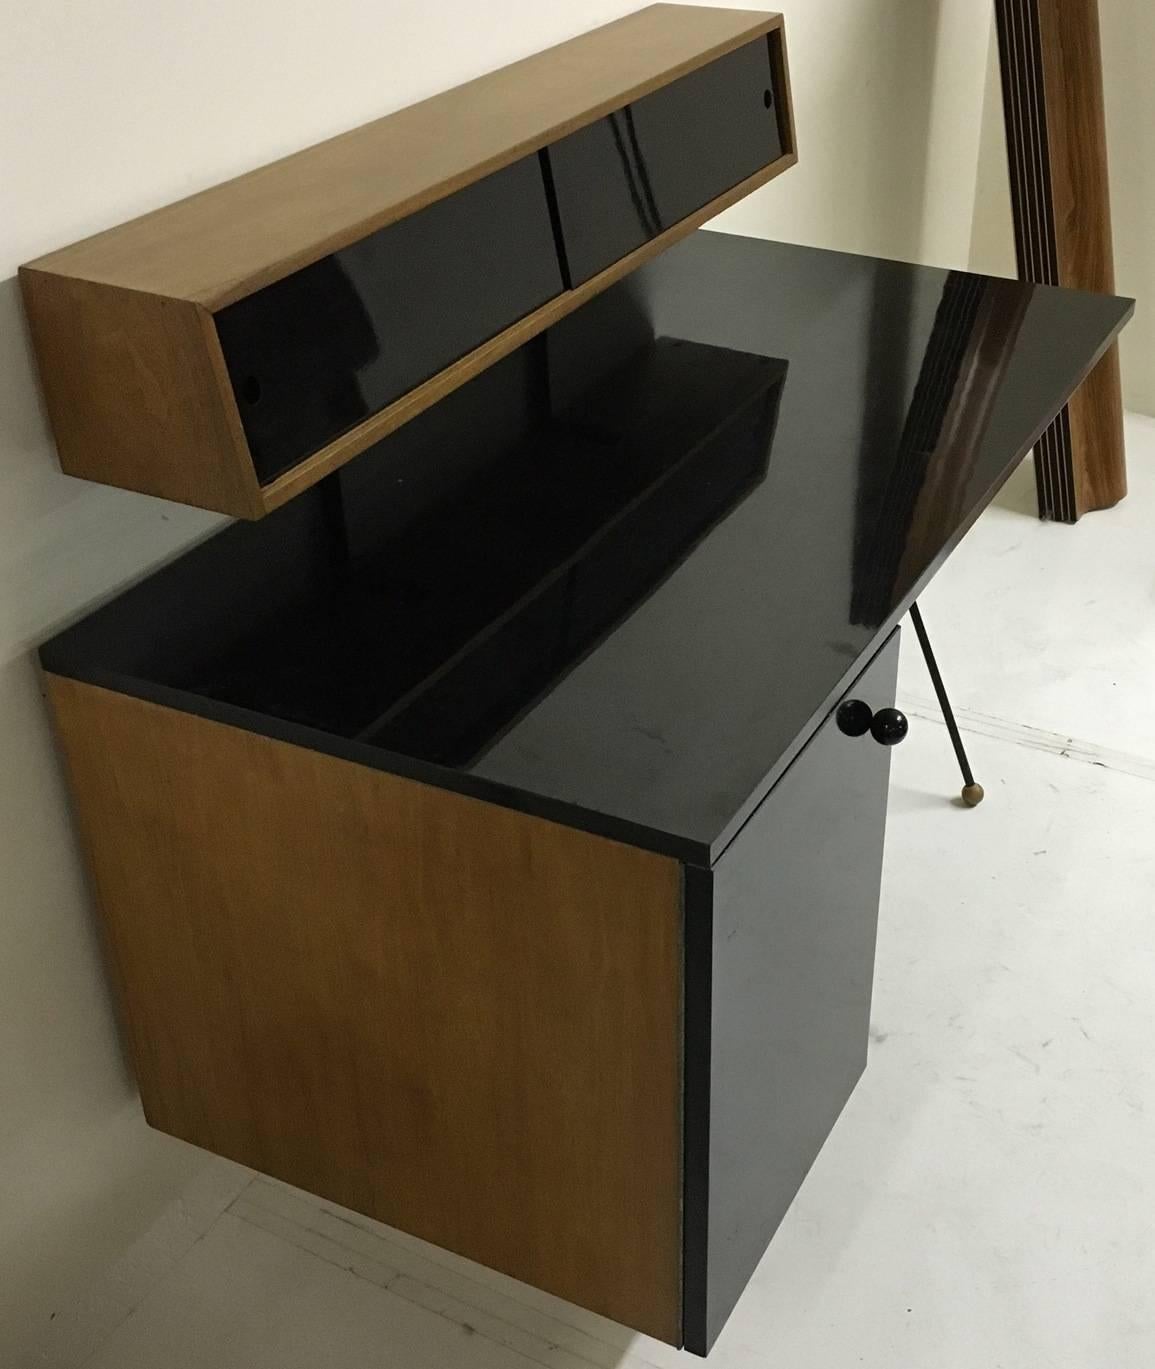 Desk by Greta Grossman for Glenn of California in original condition. Lower drawer is missing as shown in photographs.